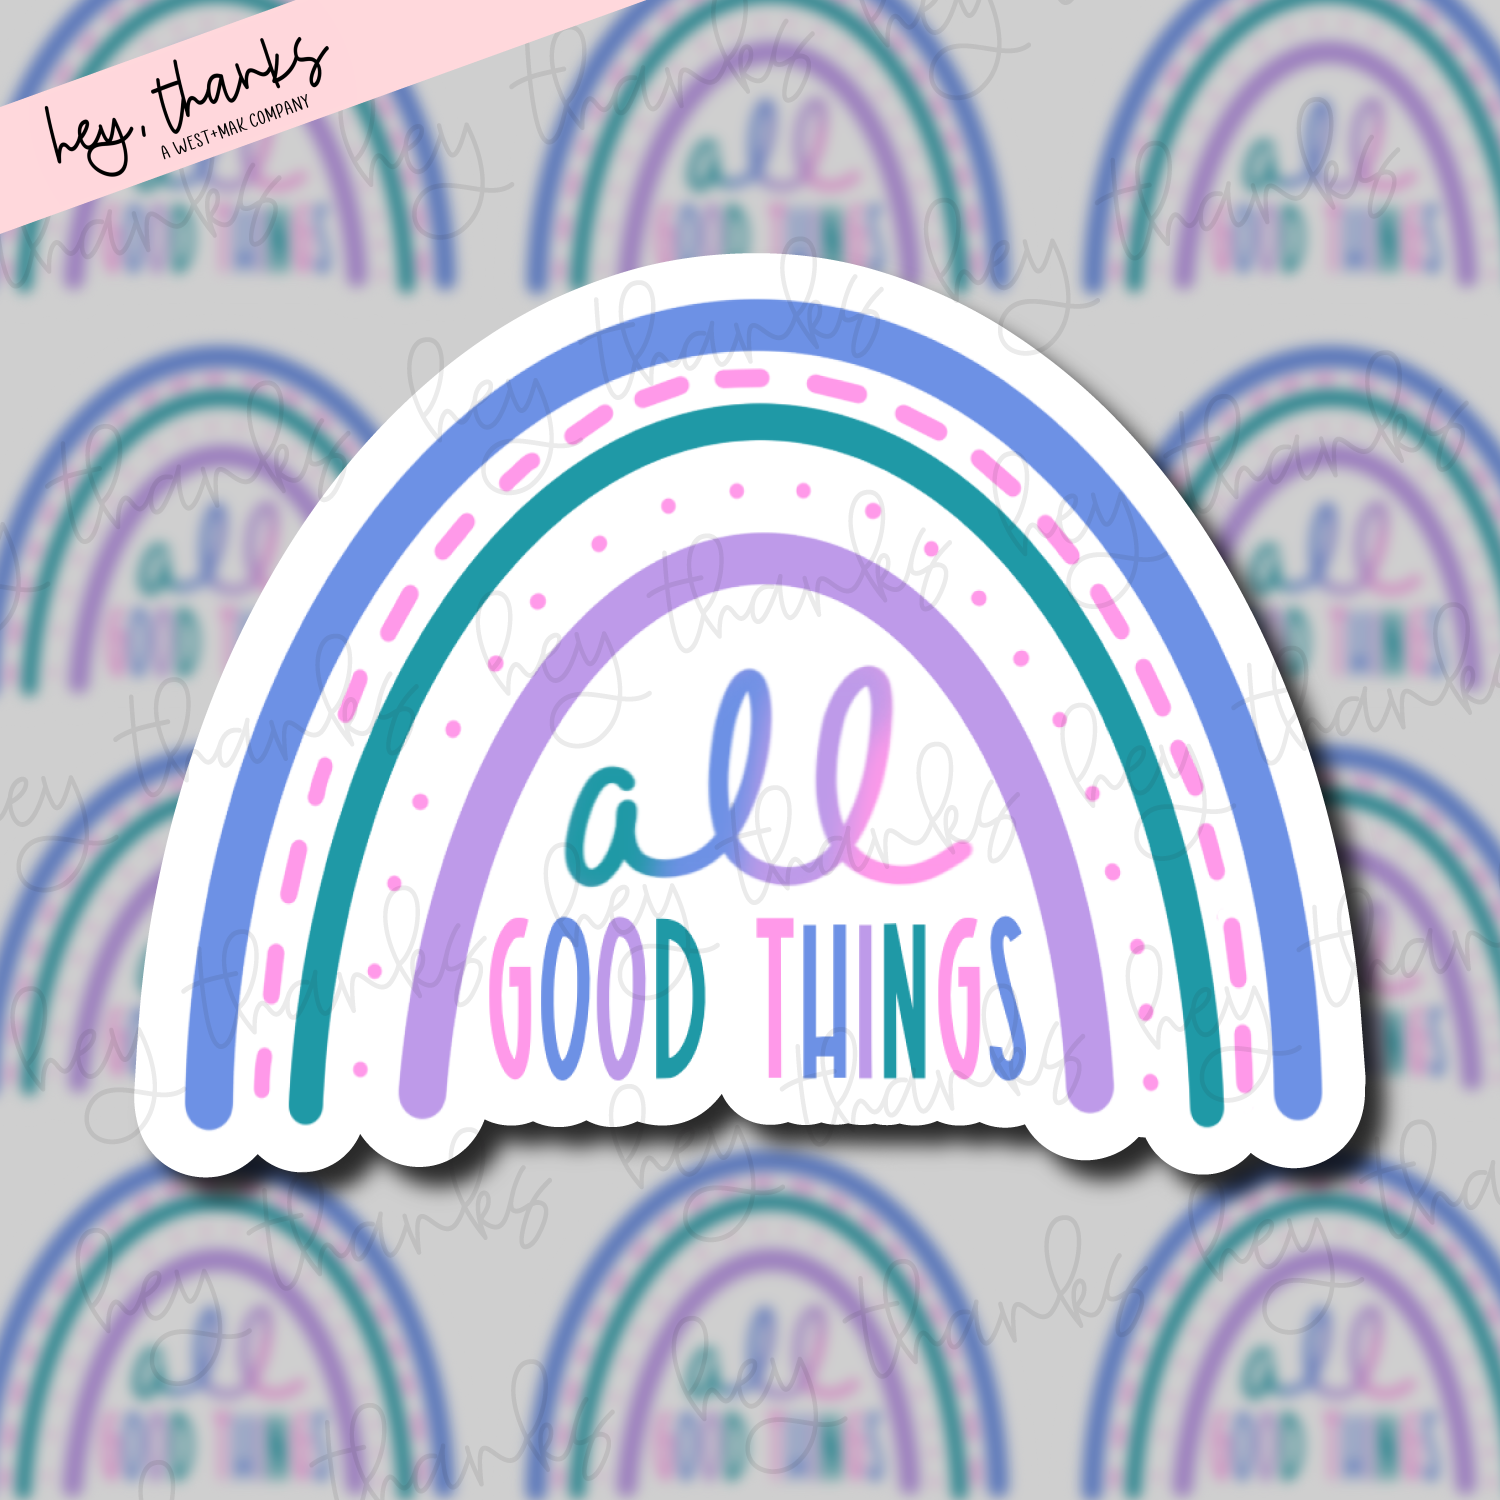 All Good Things (Cool Tones)